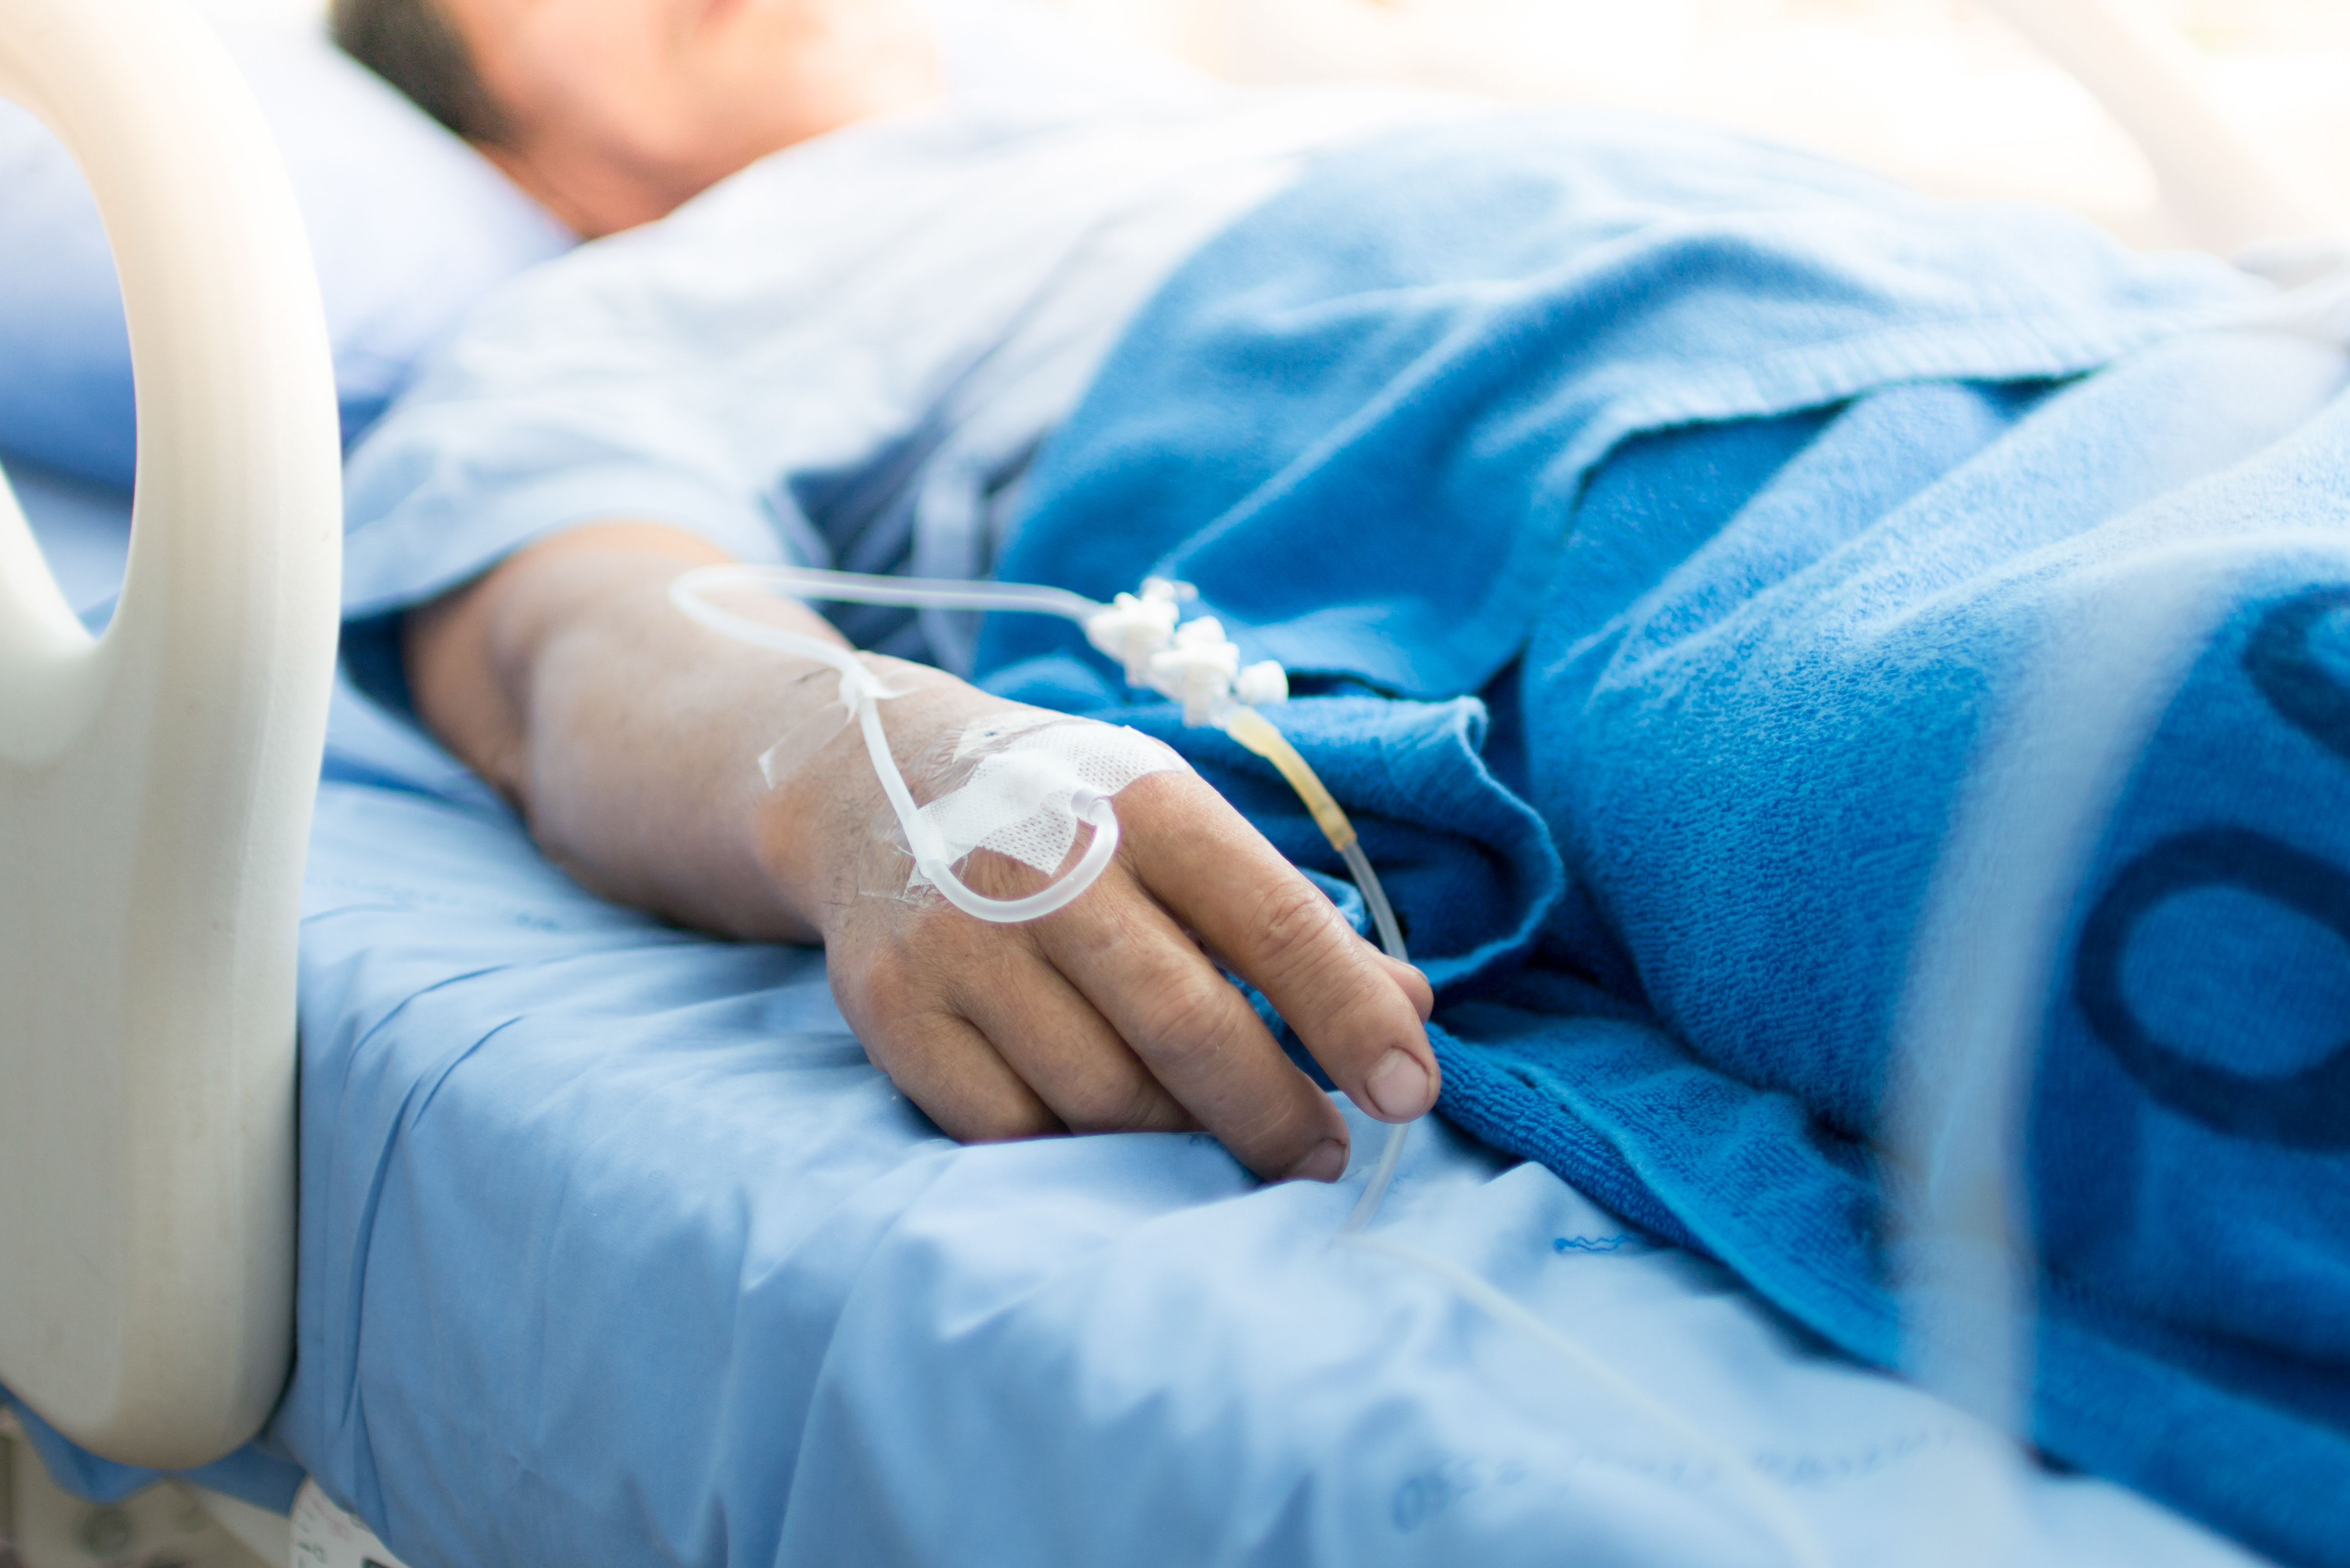 A sick patient on a hospital bed | Source: Shutterstock